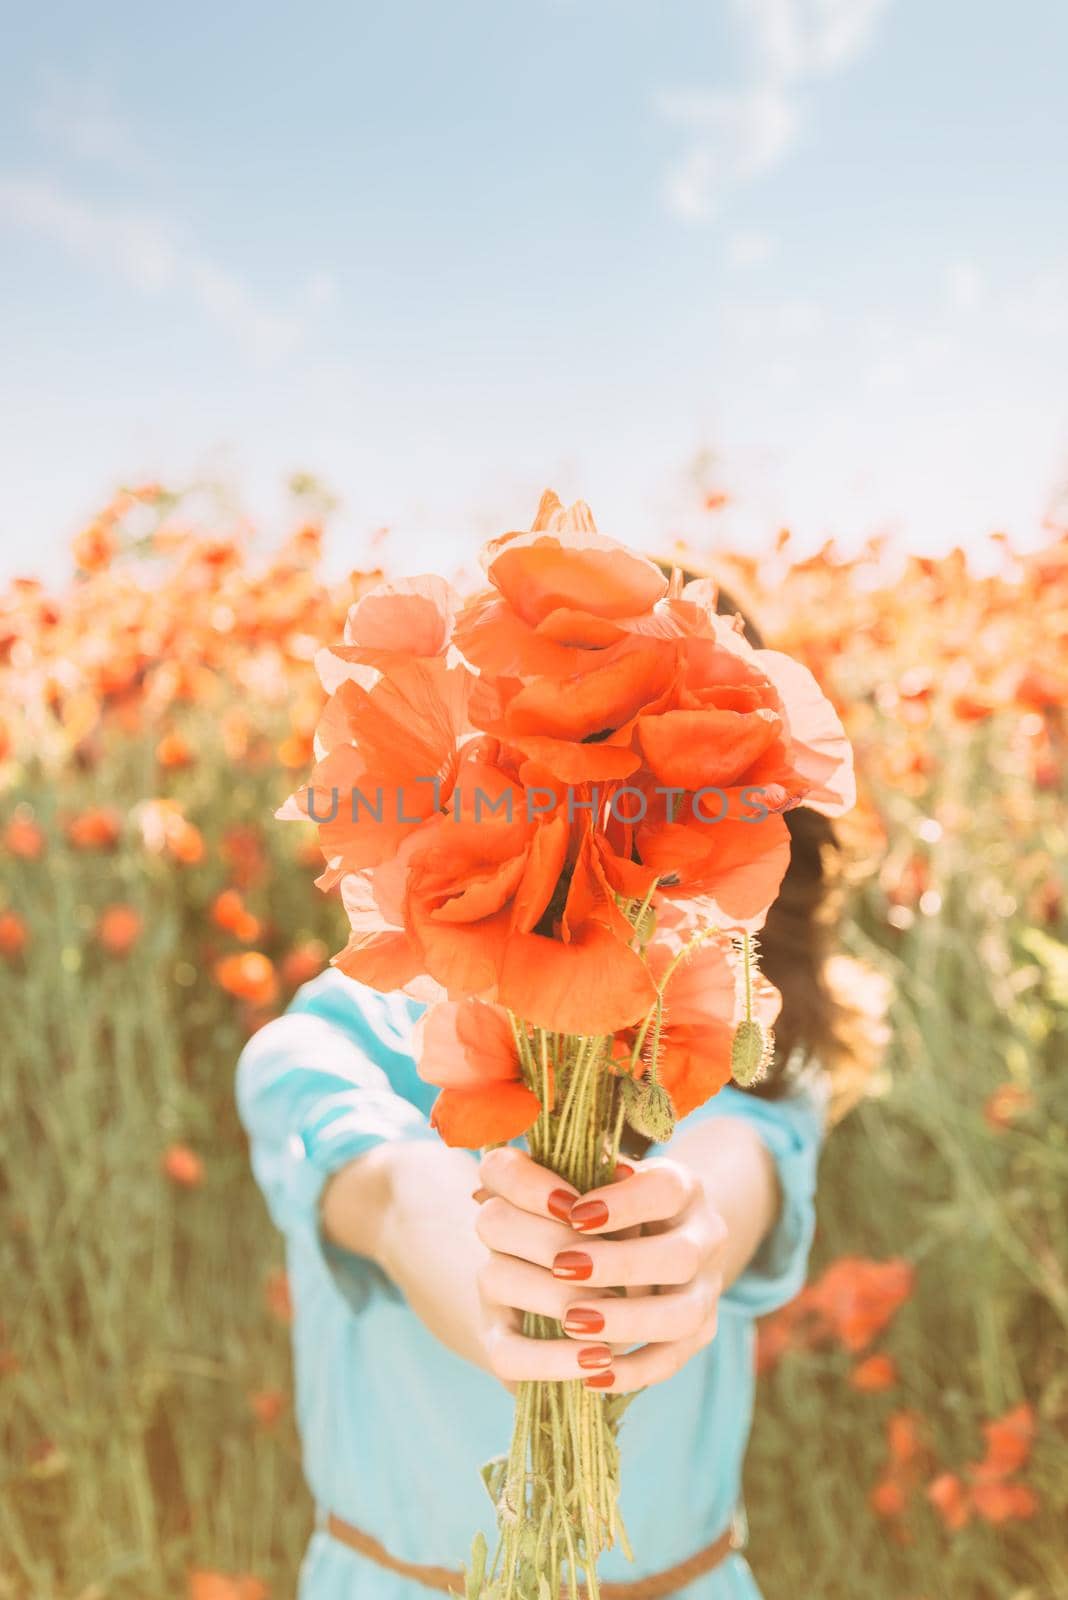 Unrecognizable young woman standing in flower field and giving a bouquet of red poppies in summer, focus on flowers.